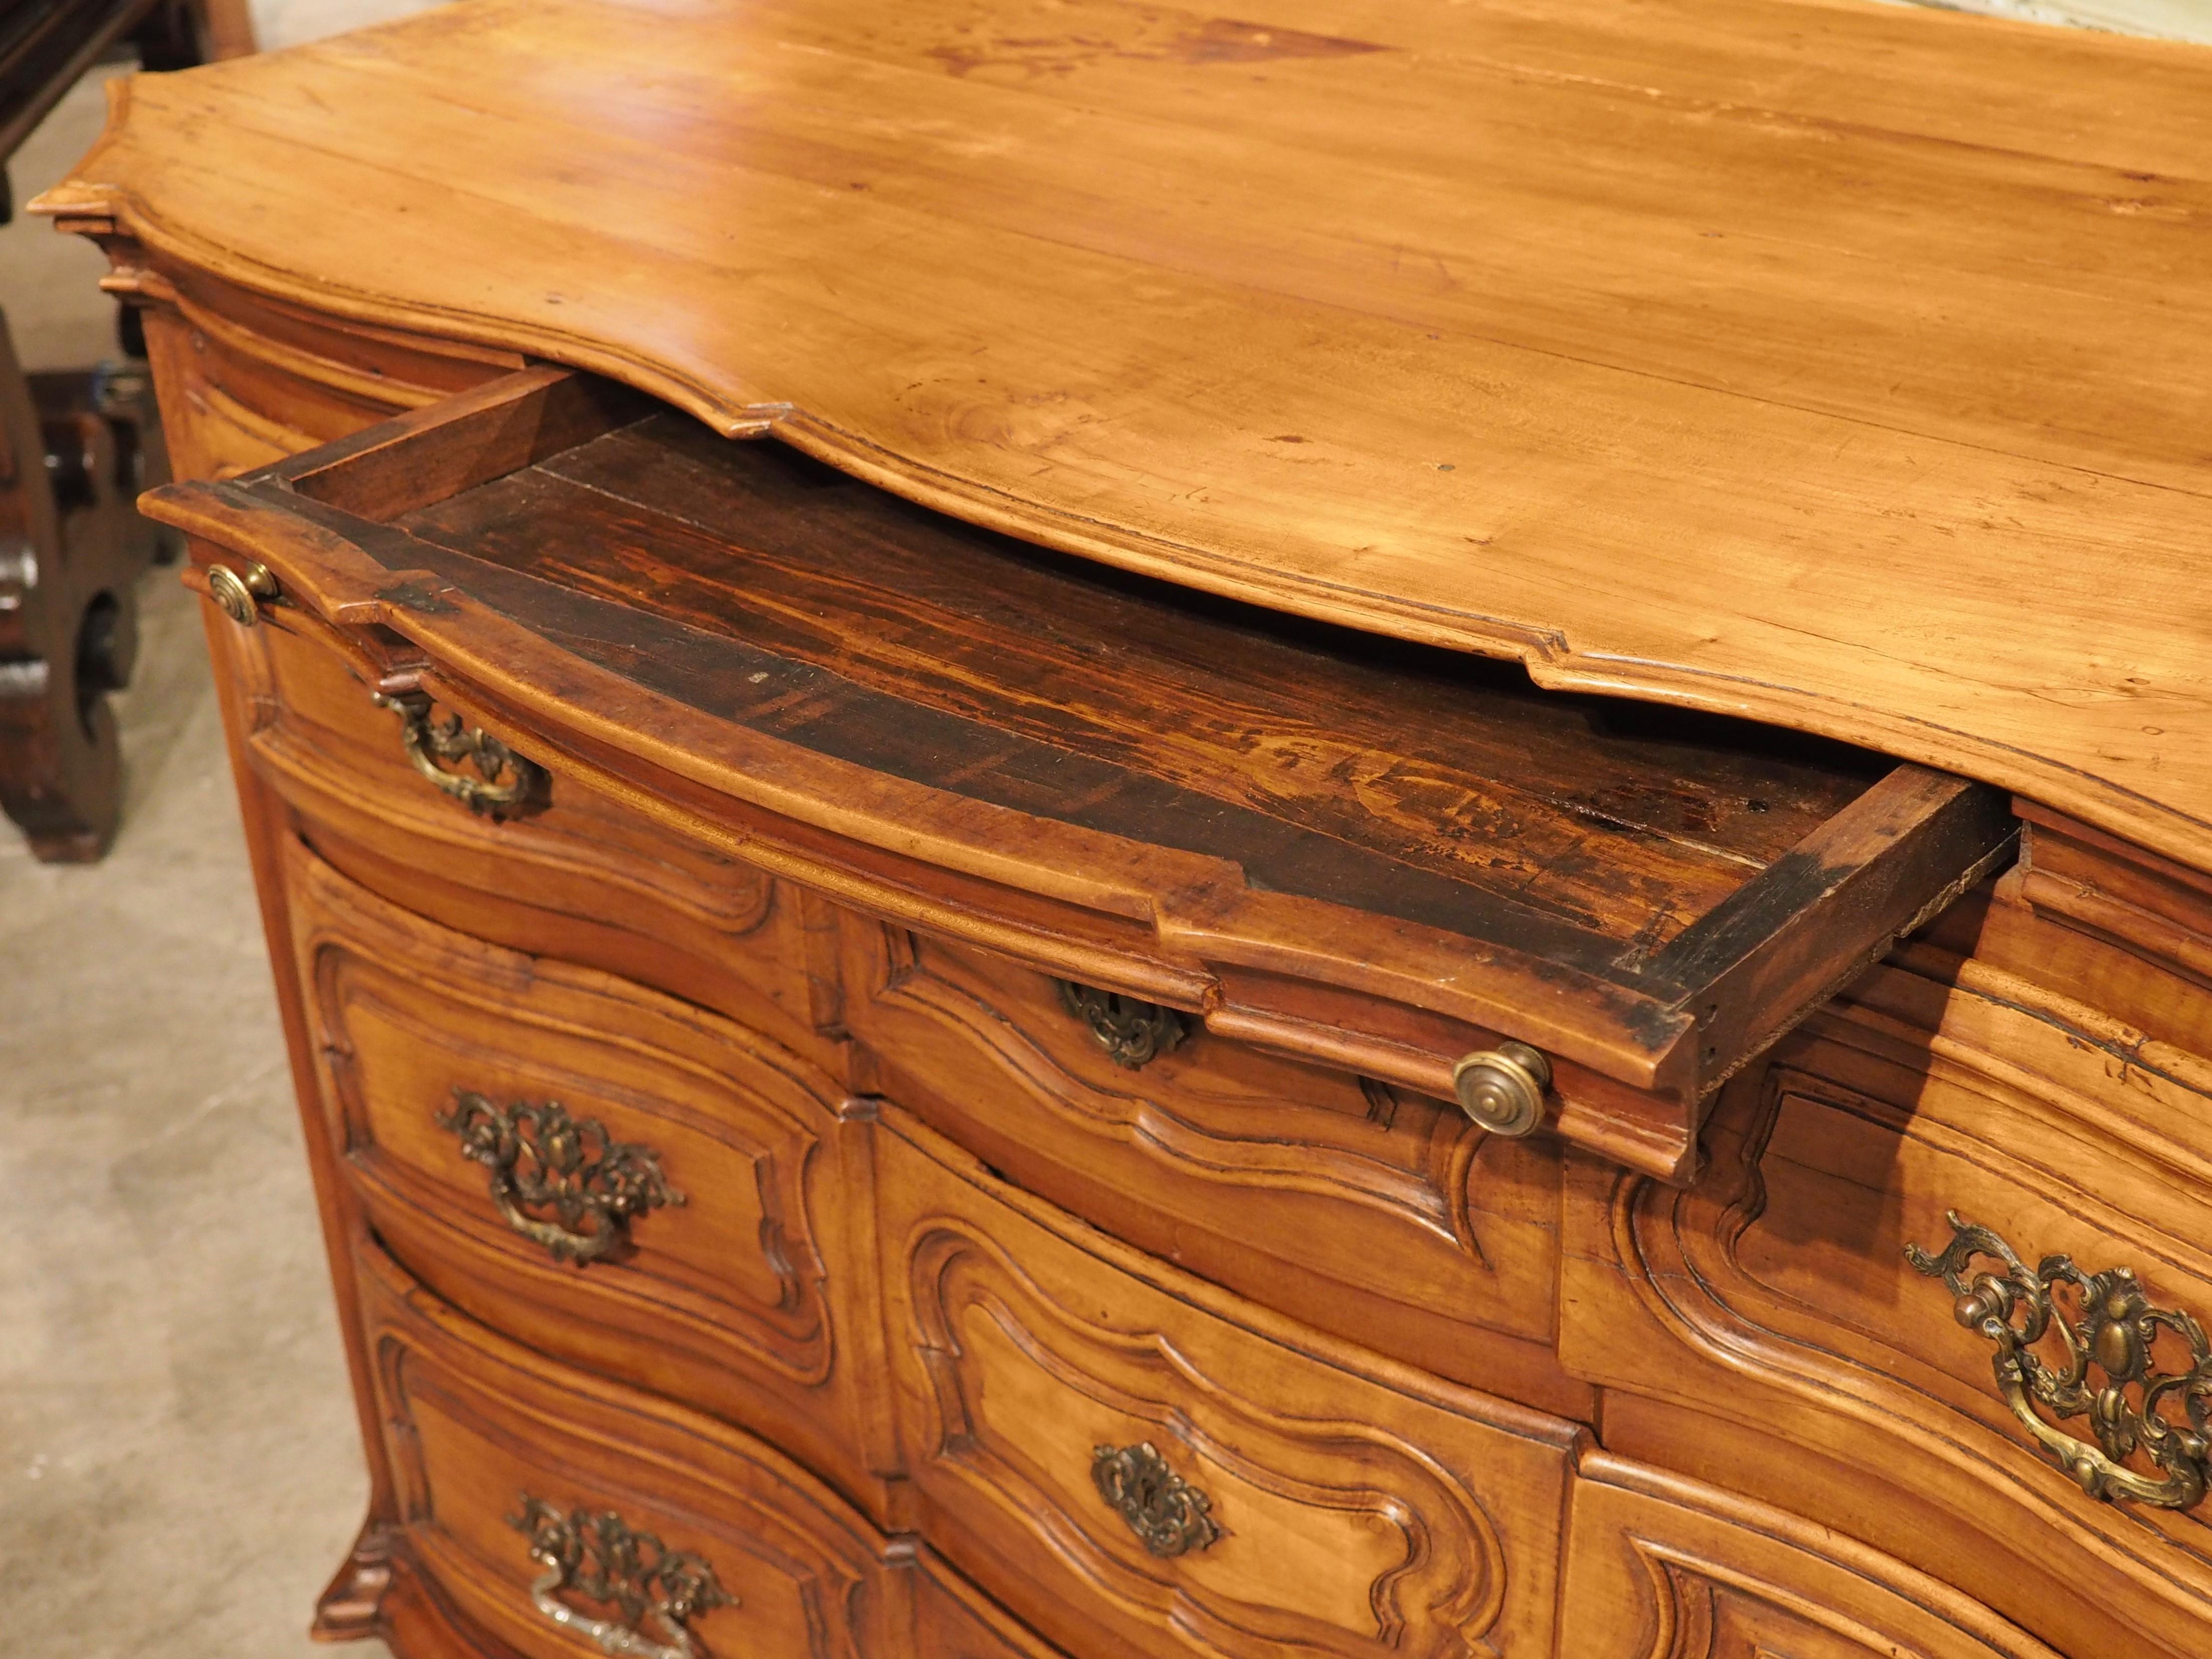 The straight grain and rich color of the cherry tree made it a desirable wood for constructing luxury furniture during the 18th century. One beautiful example is our period Louis XIV commode, which was hand-carved in France in the early